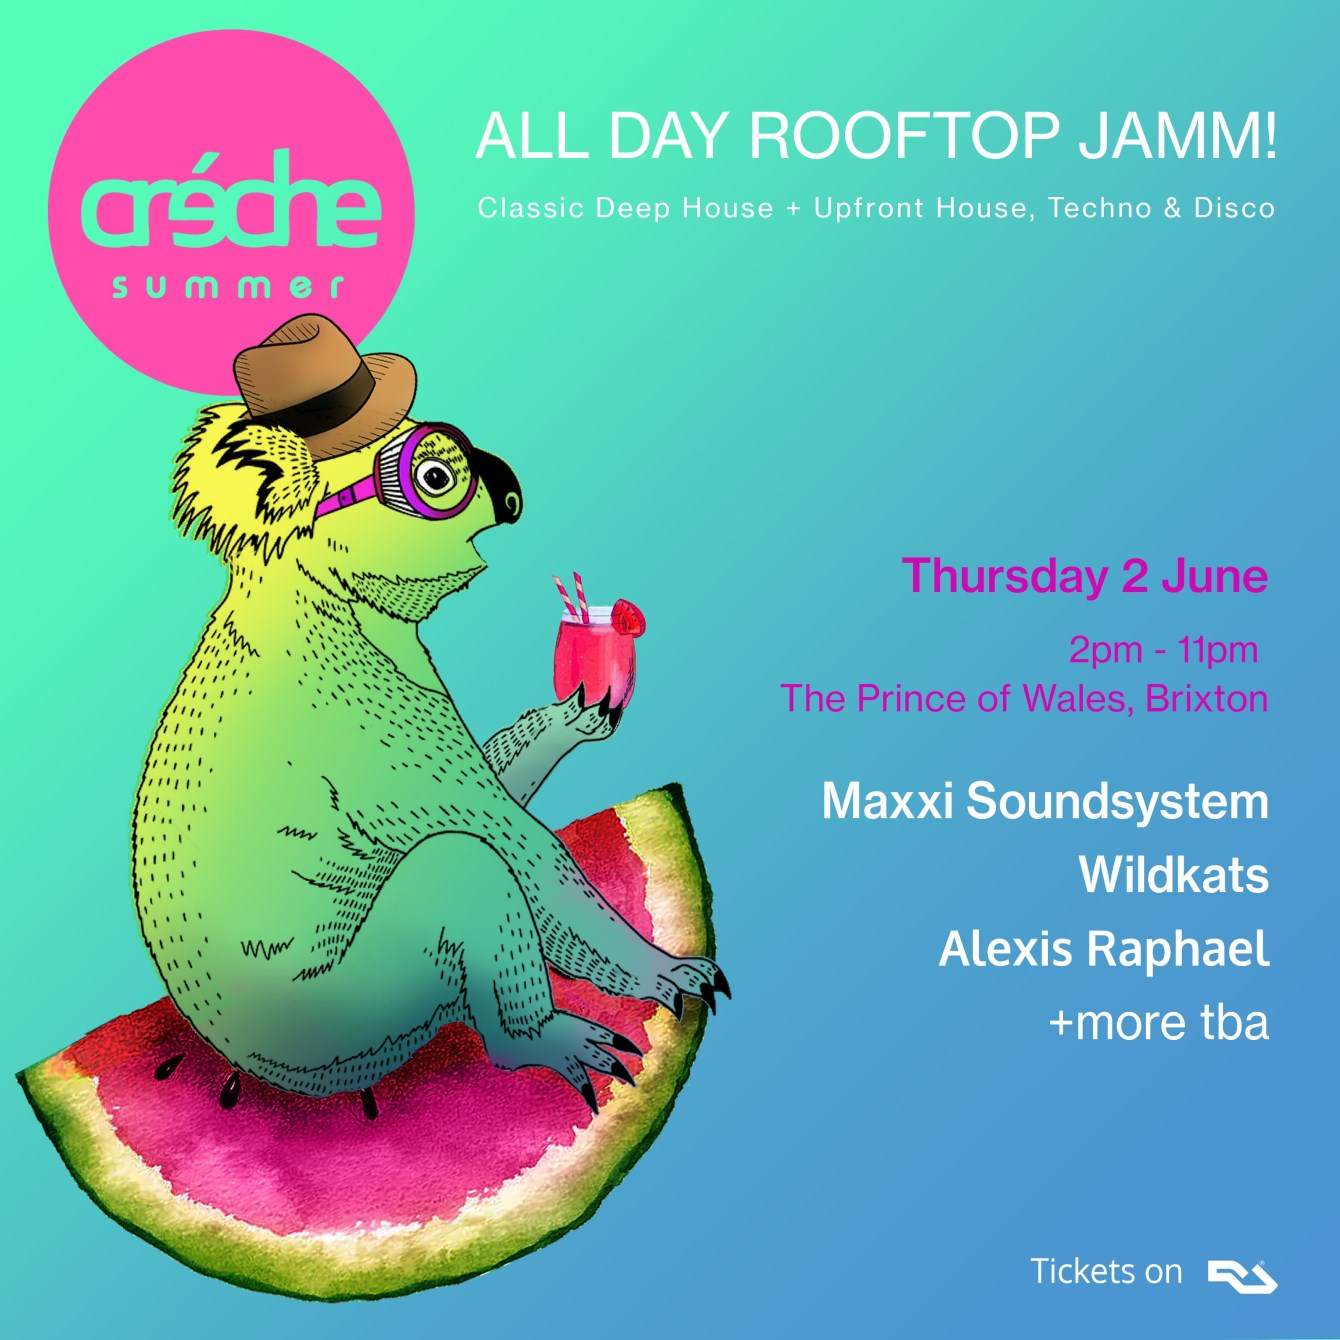 Creche Mid Summer All Day Rooftop Jamm - フライヤー表